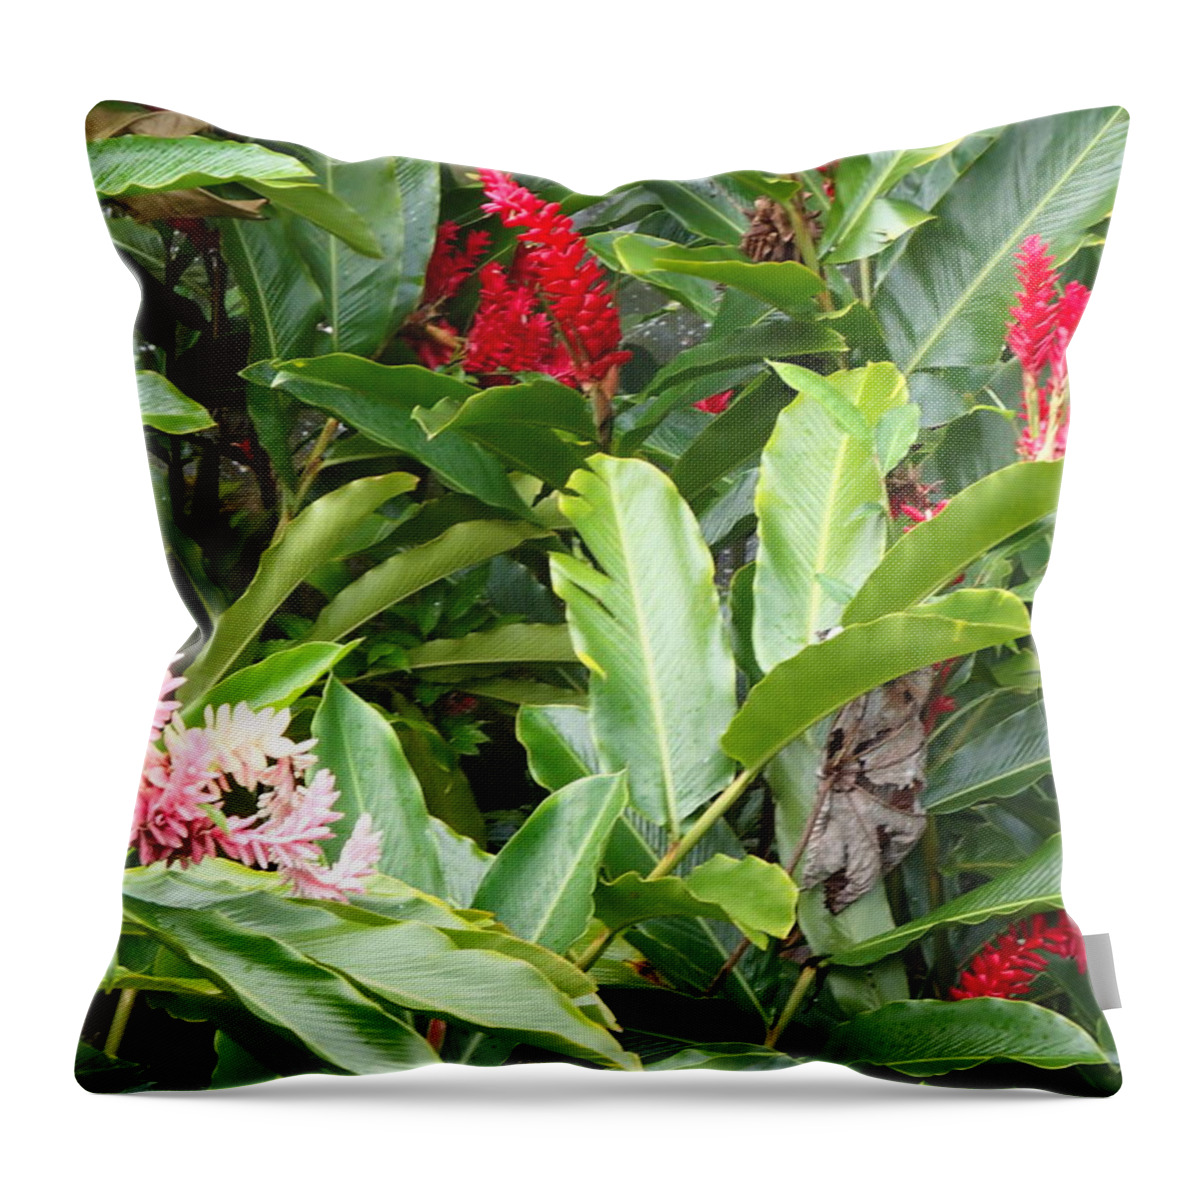 Rainforest Throw Pillow featuring the photograph Rainforest Beauty by Lois Lepisto